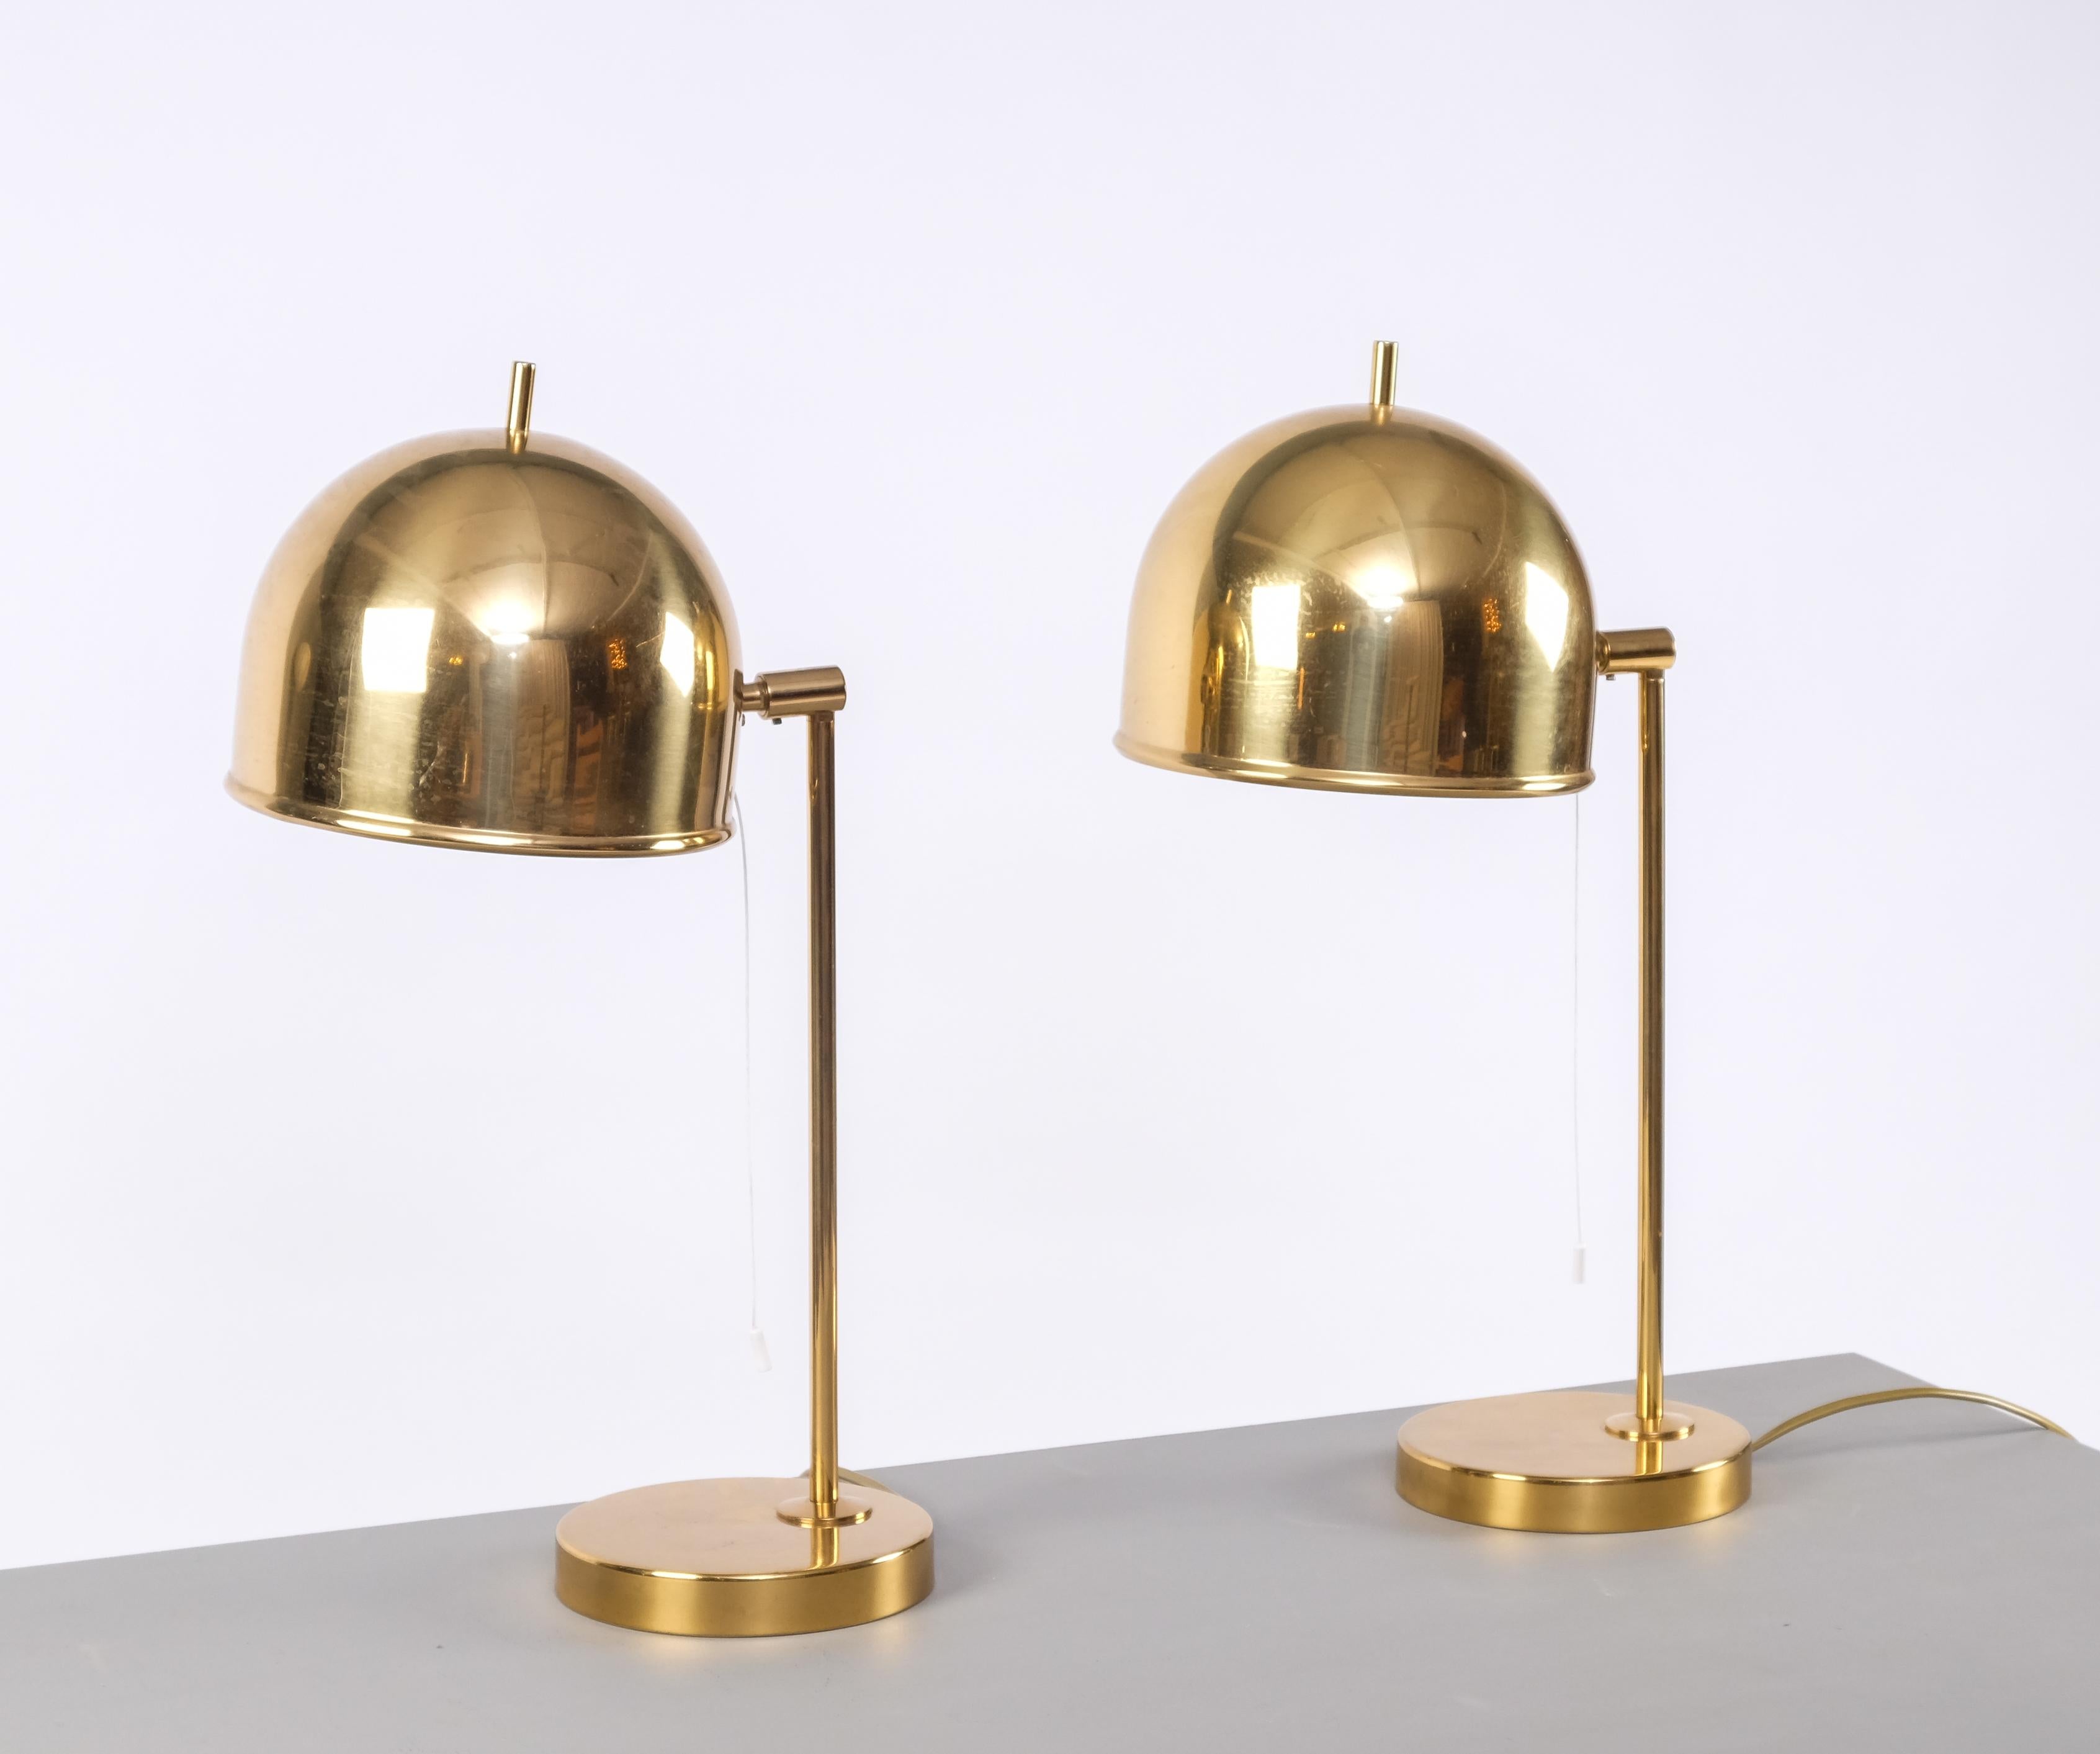 Table lamps in brass, model B-075 manufactured by Bergboms, Sweden, 1960s.
Listed price is for the pair. 